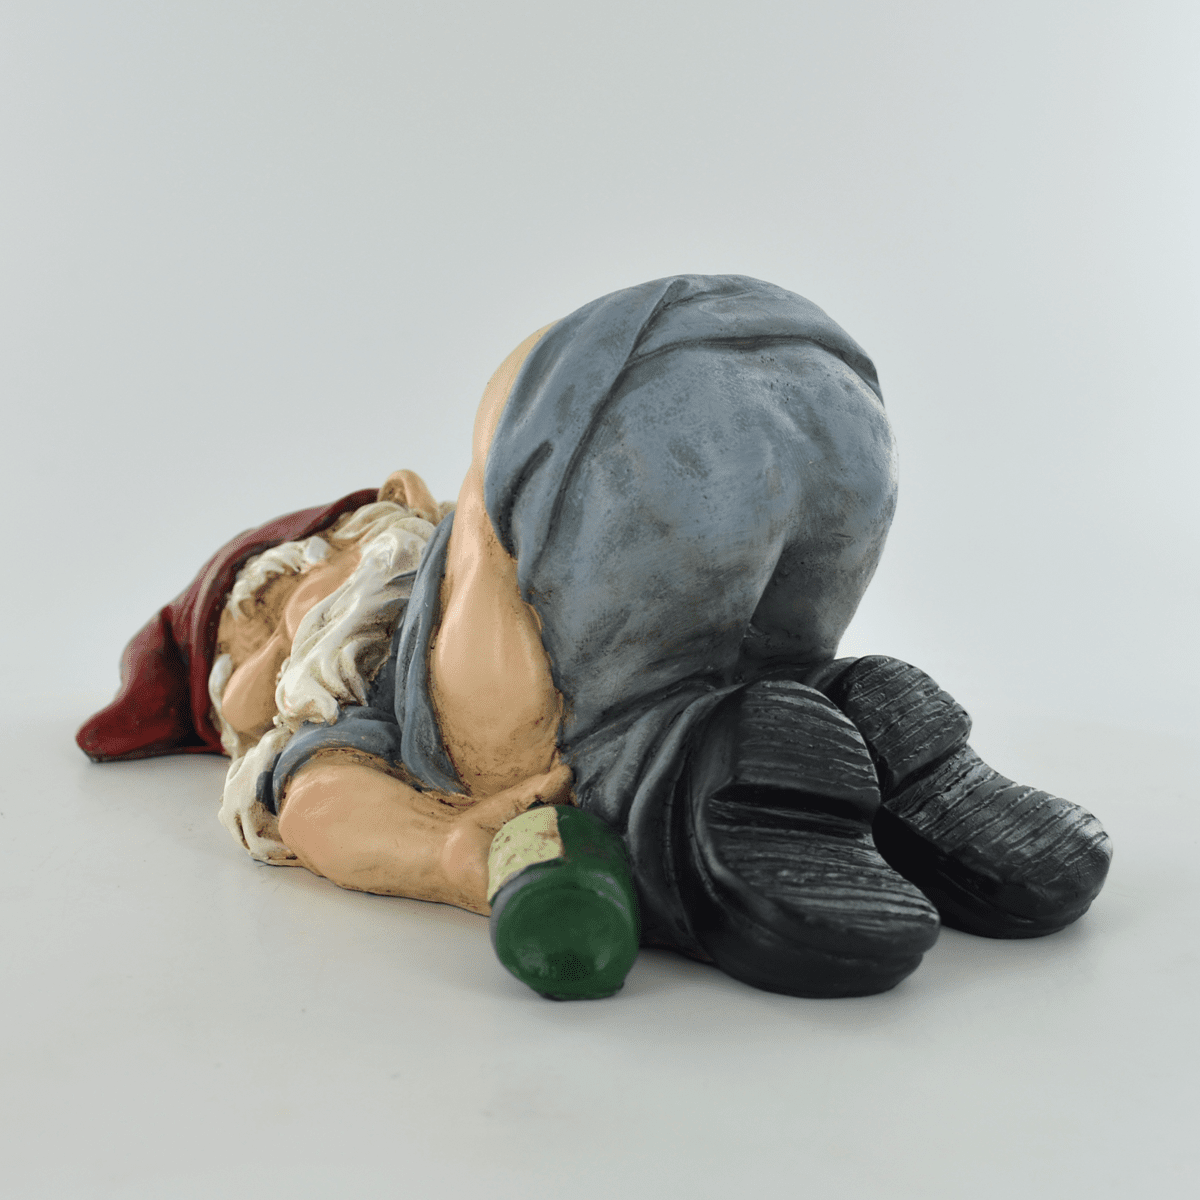 Gnome Drunk And Disorderly Cheeky Figure Home Decor Garden Ornament